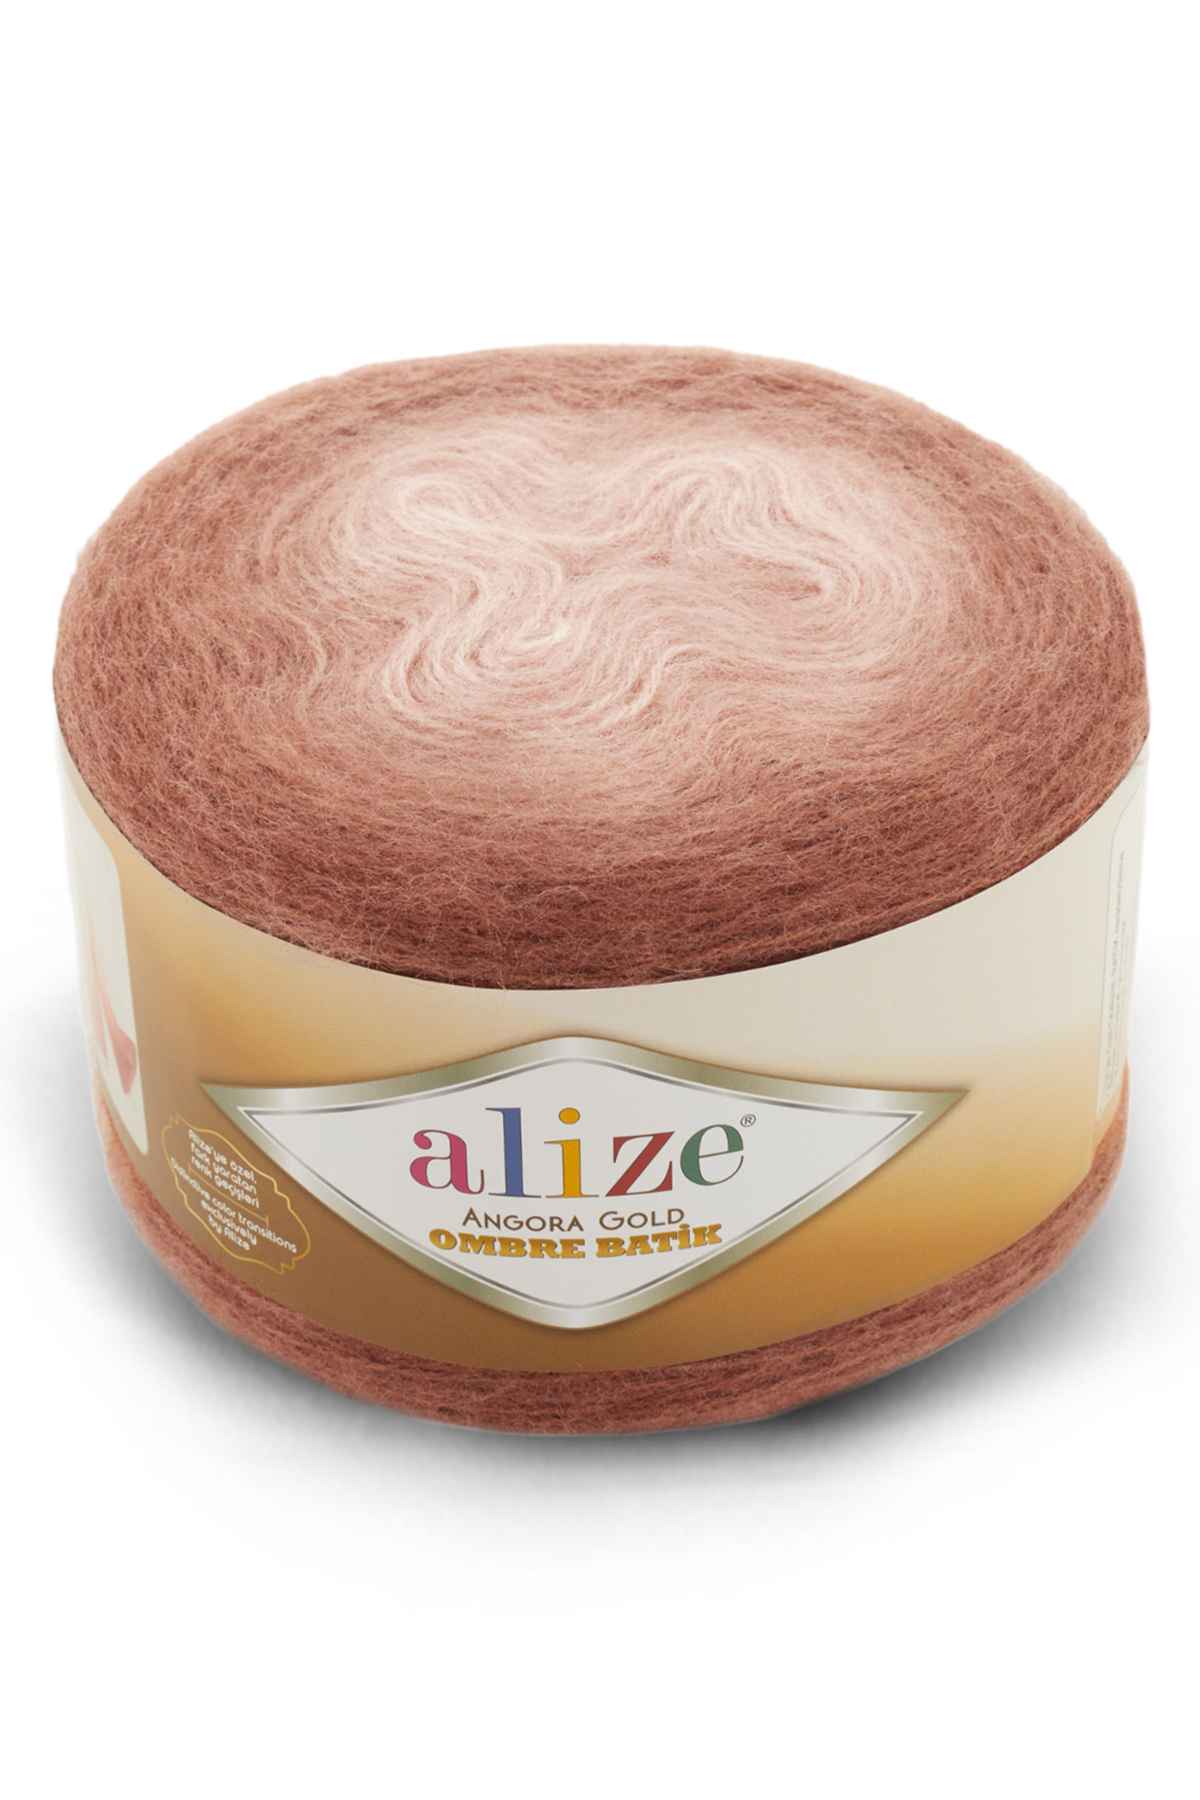 Alize Angora Gold Ombre Multicolor Wool Yarn